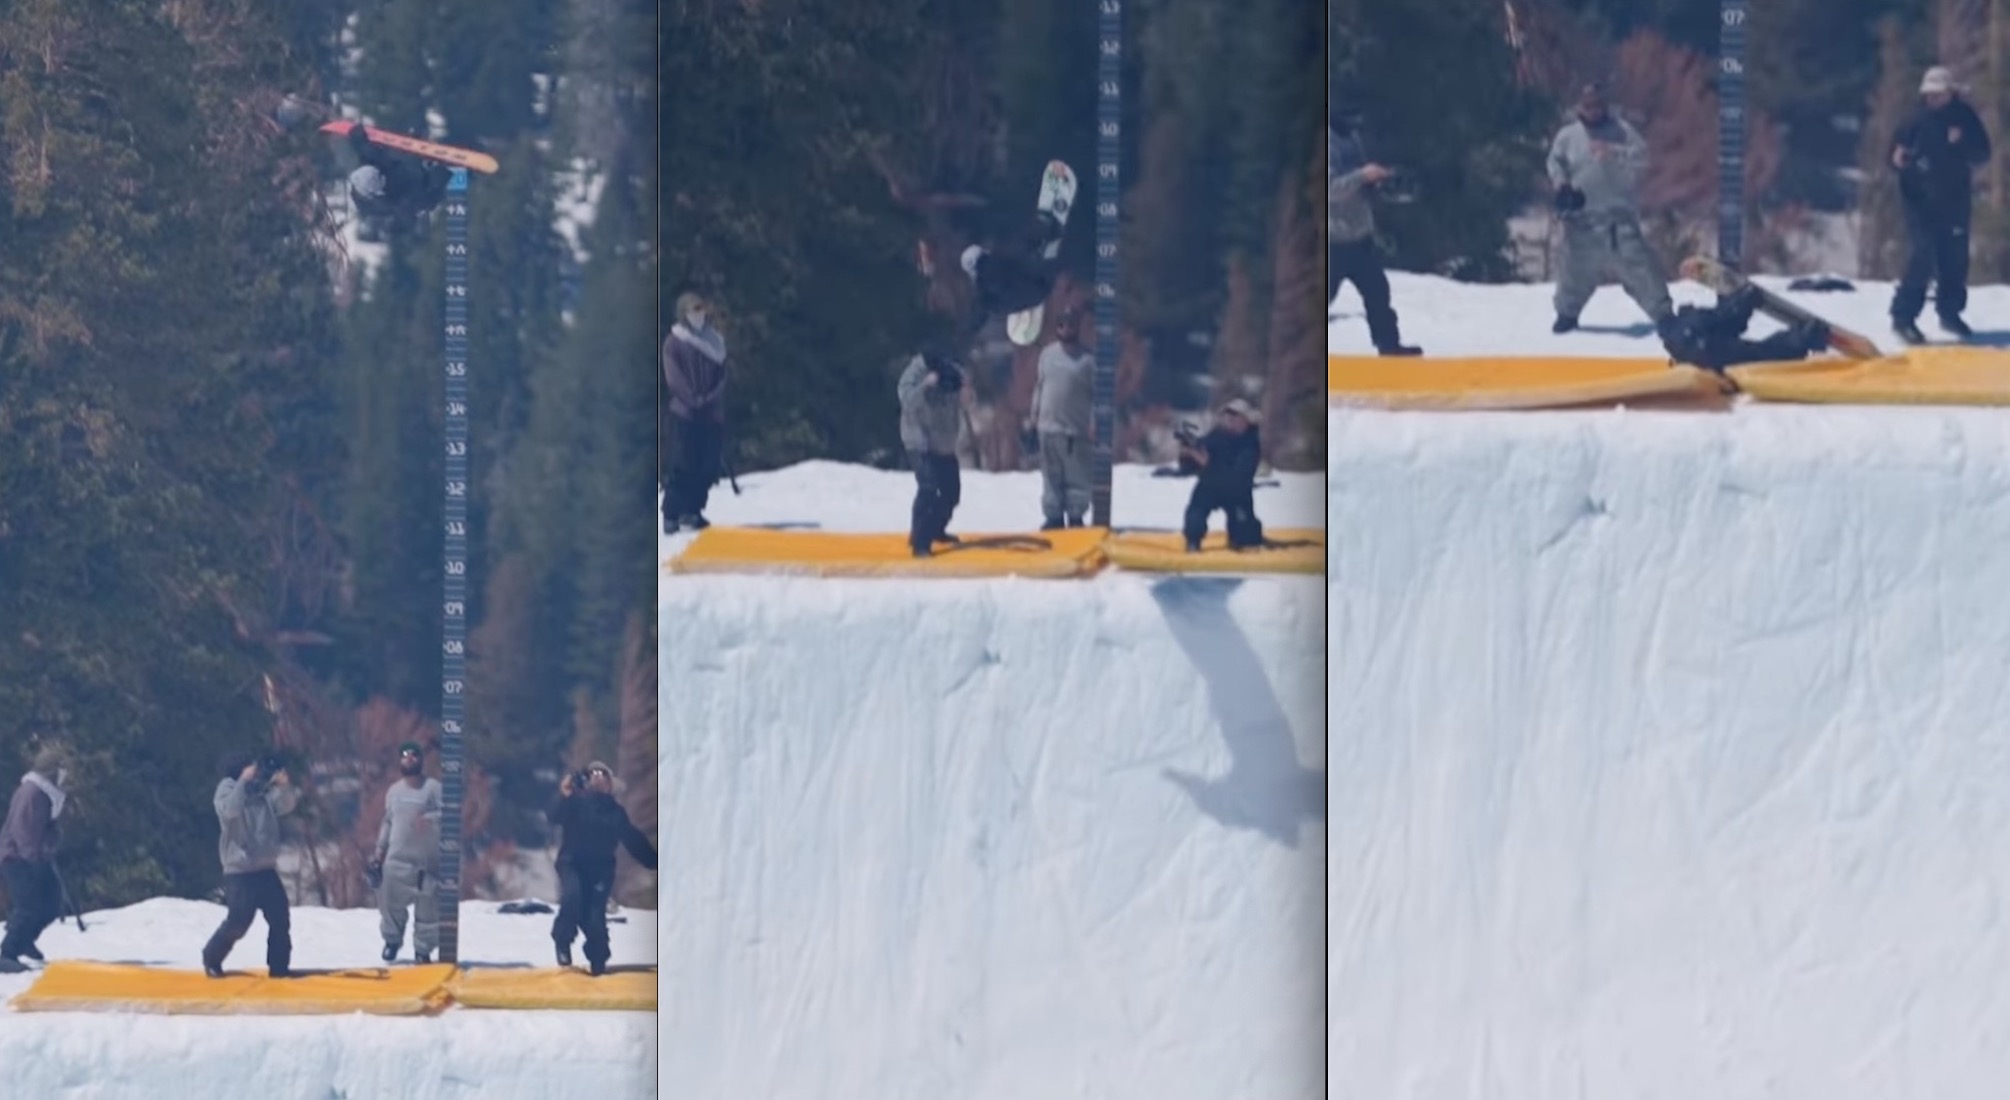 VIDEO: Scary Moment As Olympic Snowboarder Falls 20 Feet To Flat